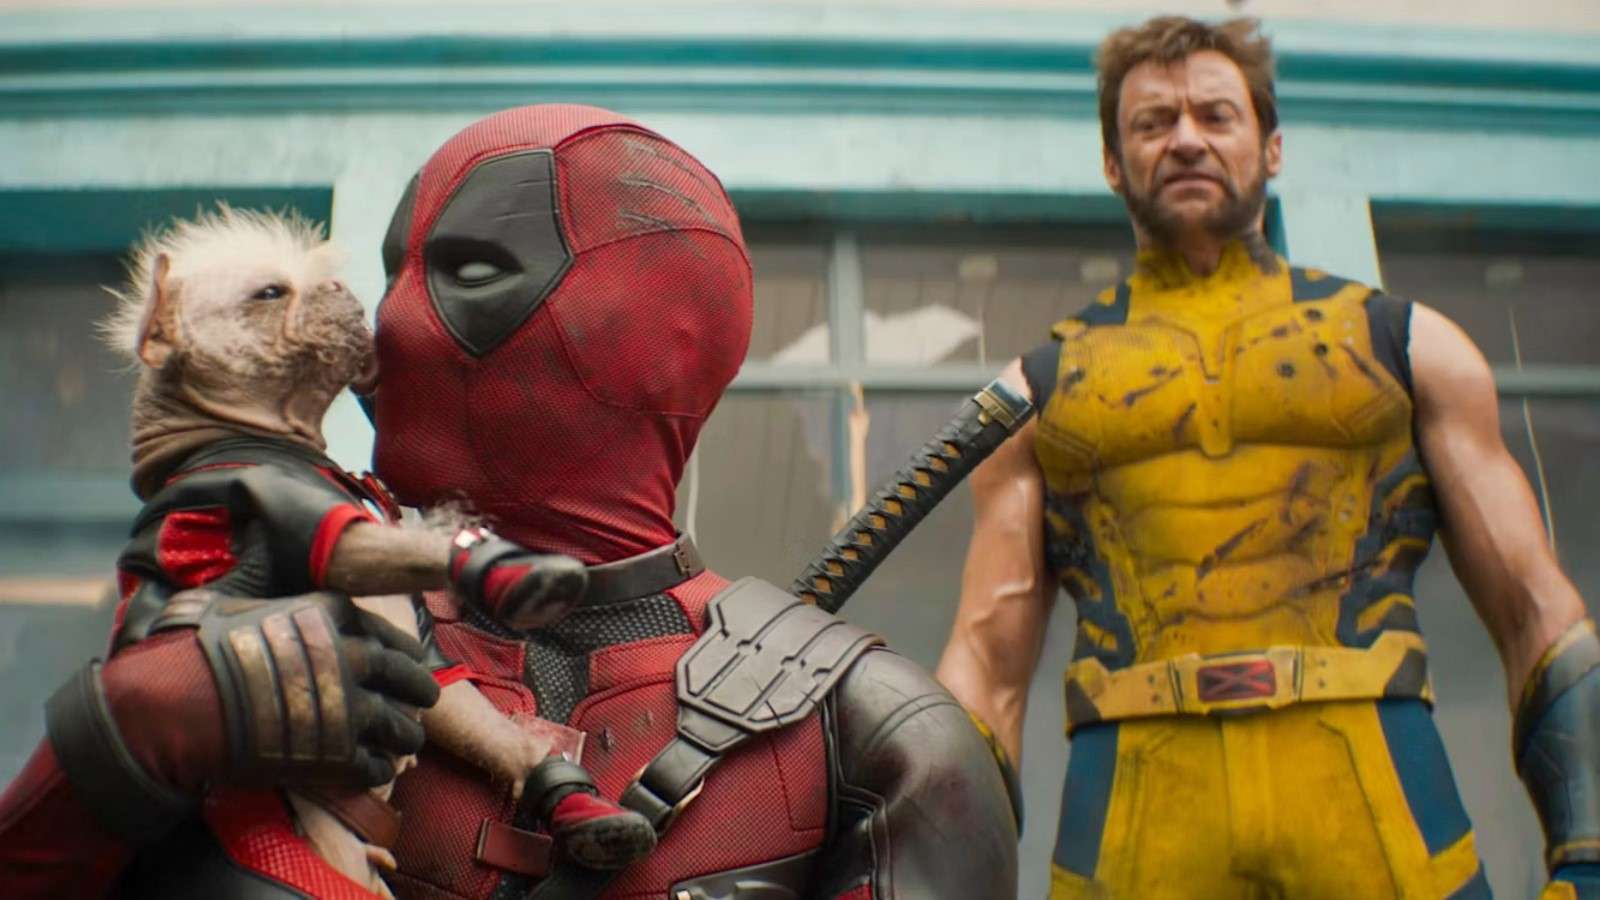 Ryan Reynolds and Hugh Jackman as Deadpool and Wolverine with Deadpool holding a dog that's licking his face